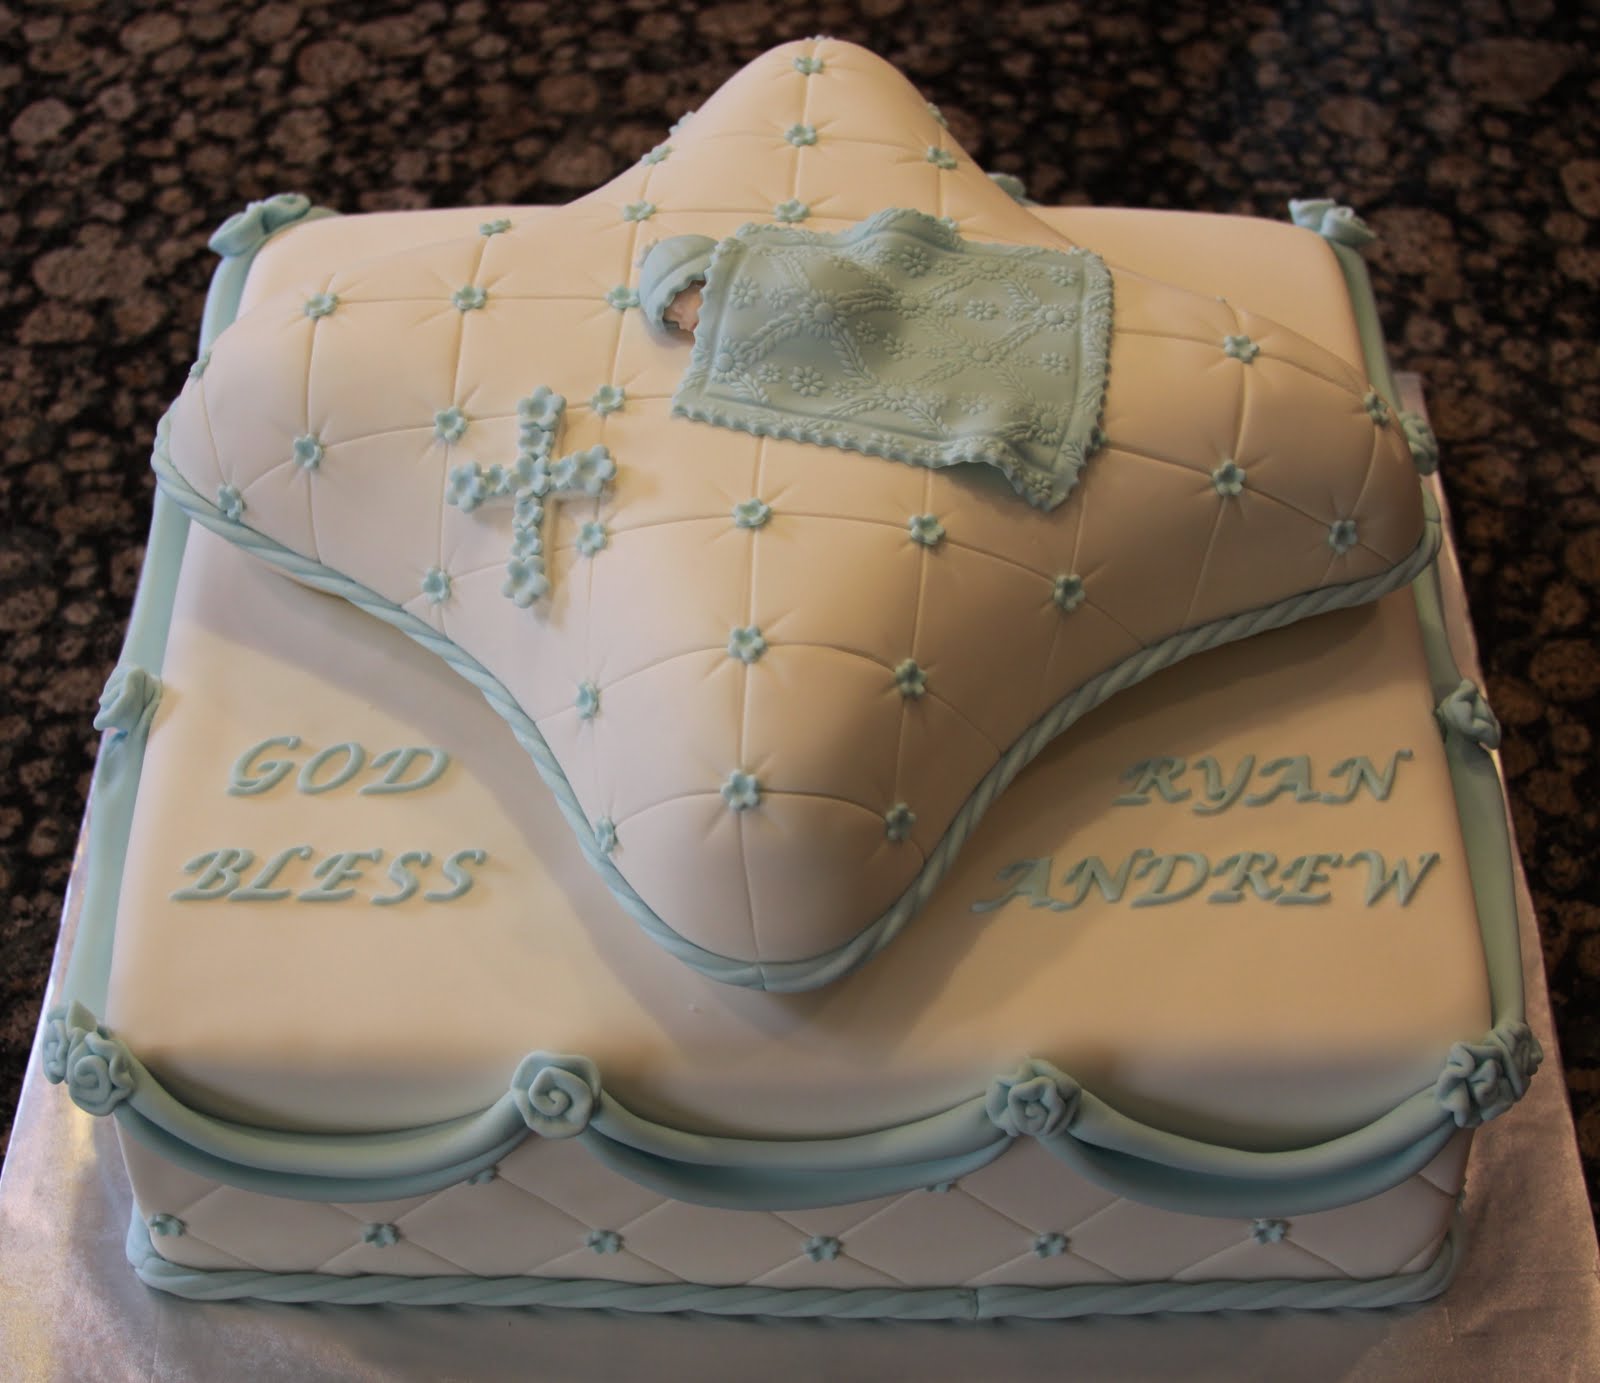 11 Photos of Pillow Cakes For Baptism